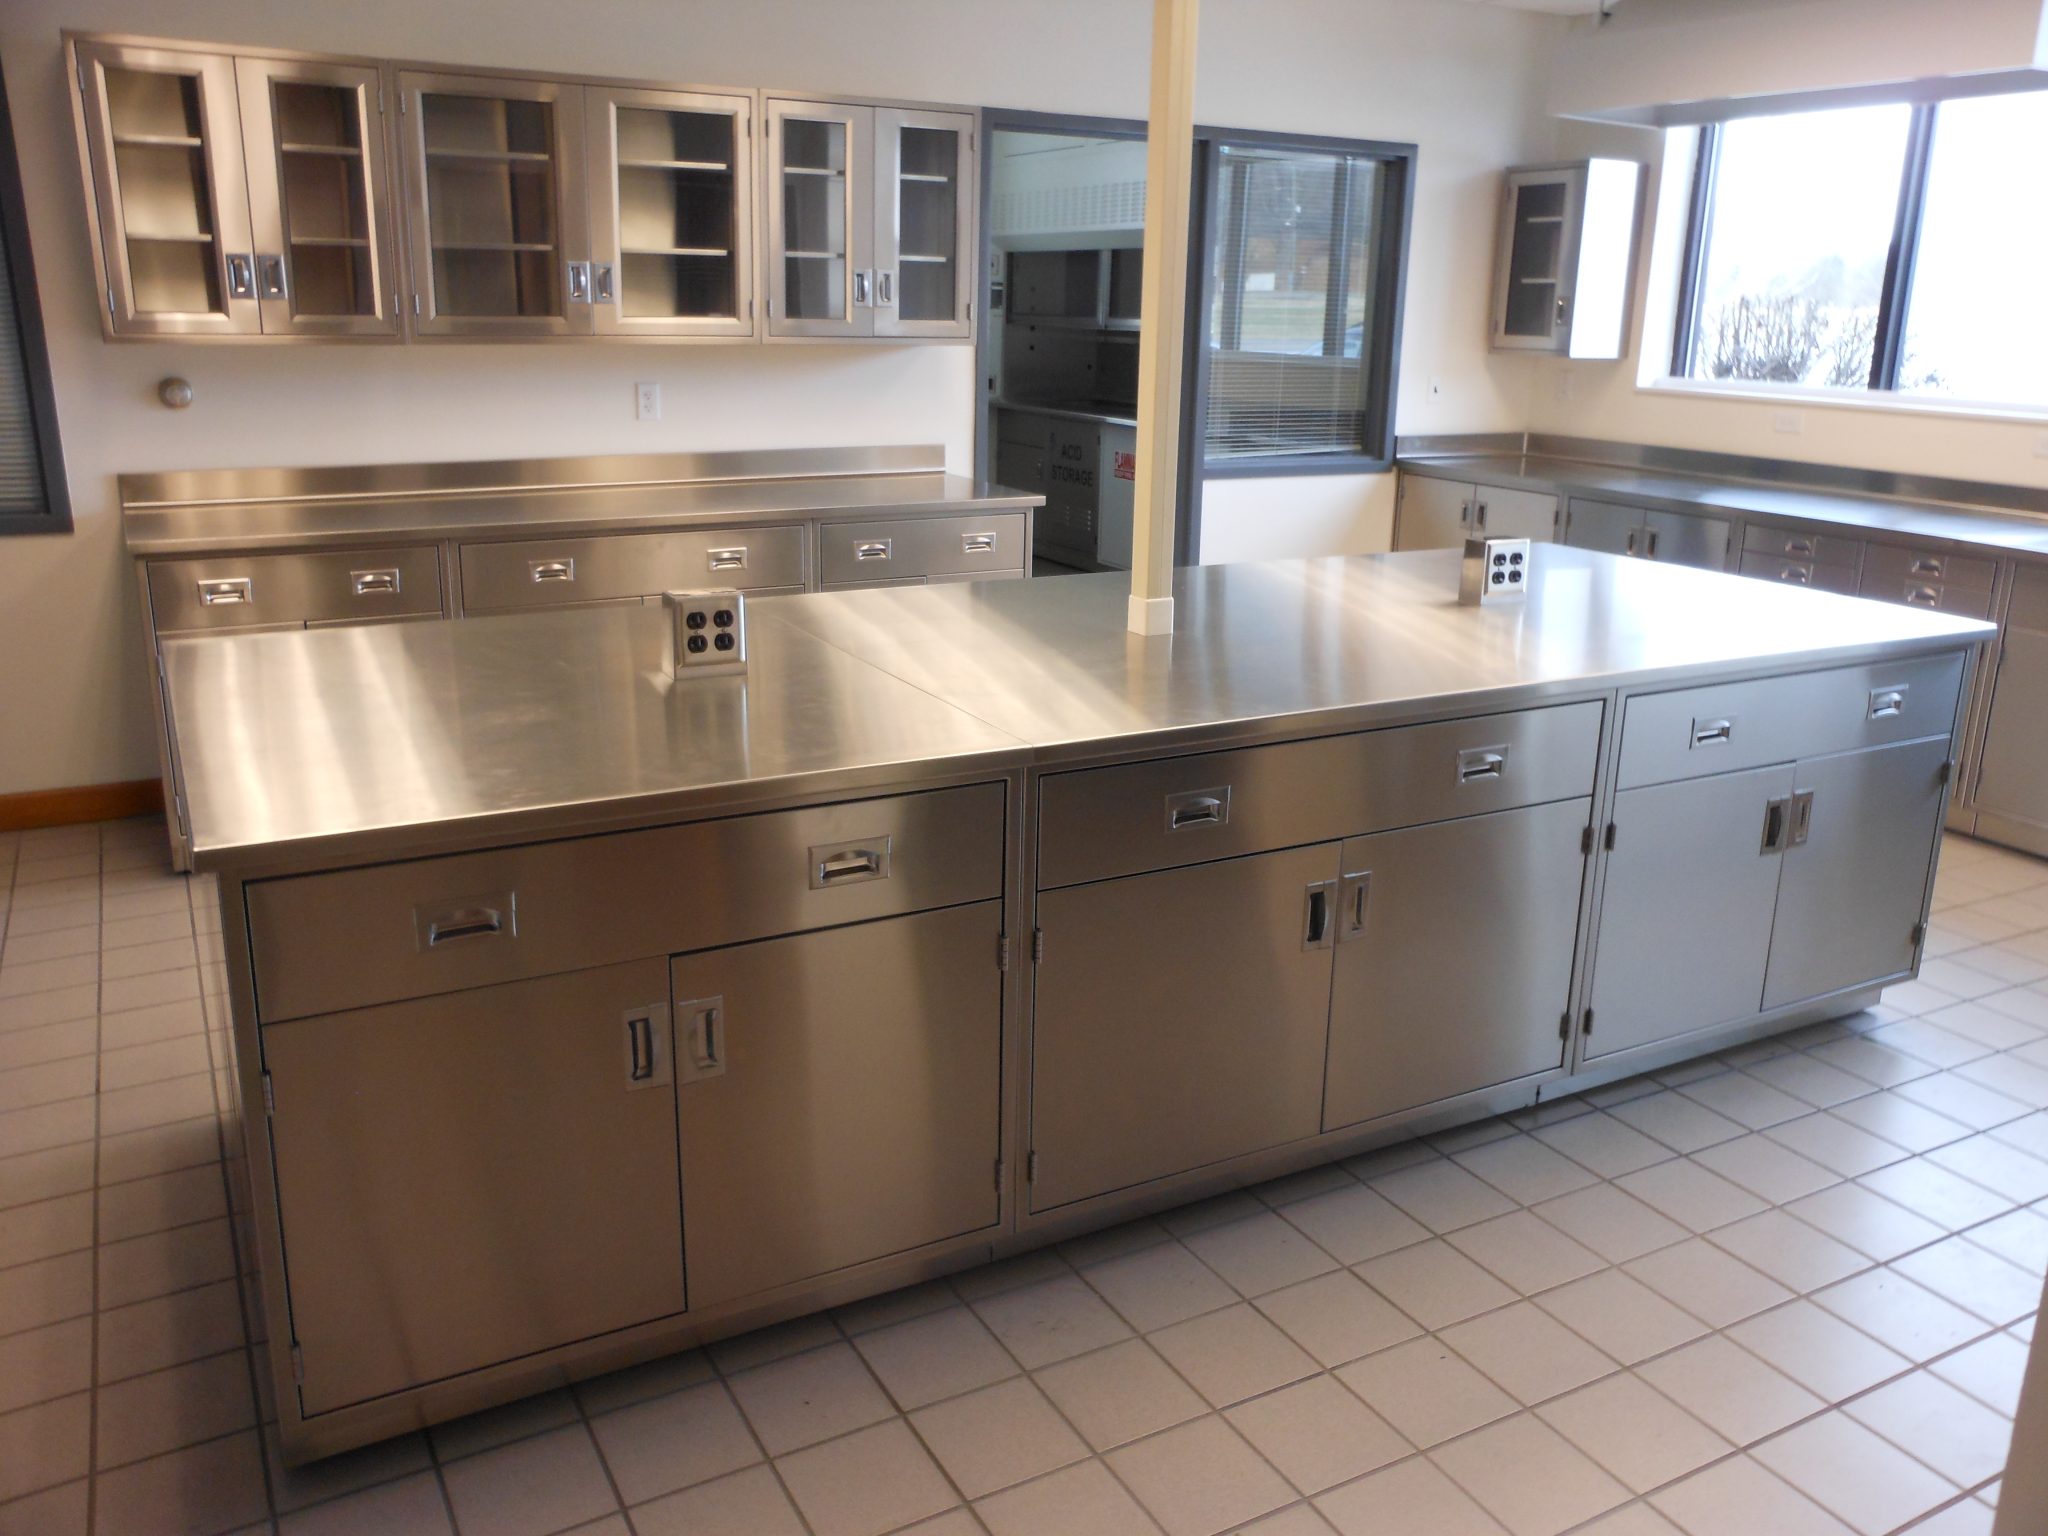 Stainless Steel Casework - Stainless steel is a popular material for laboratory casework due to its strength, durability, and resistance to corrosion.